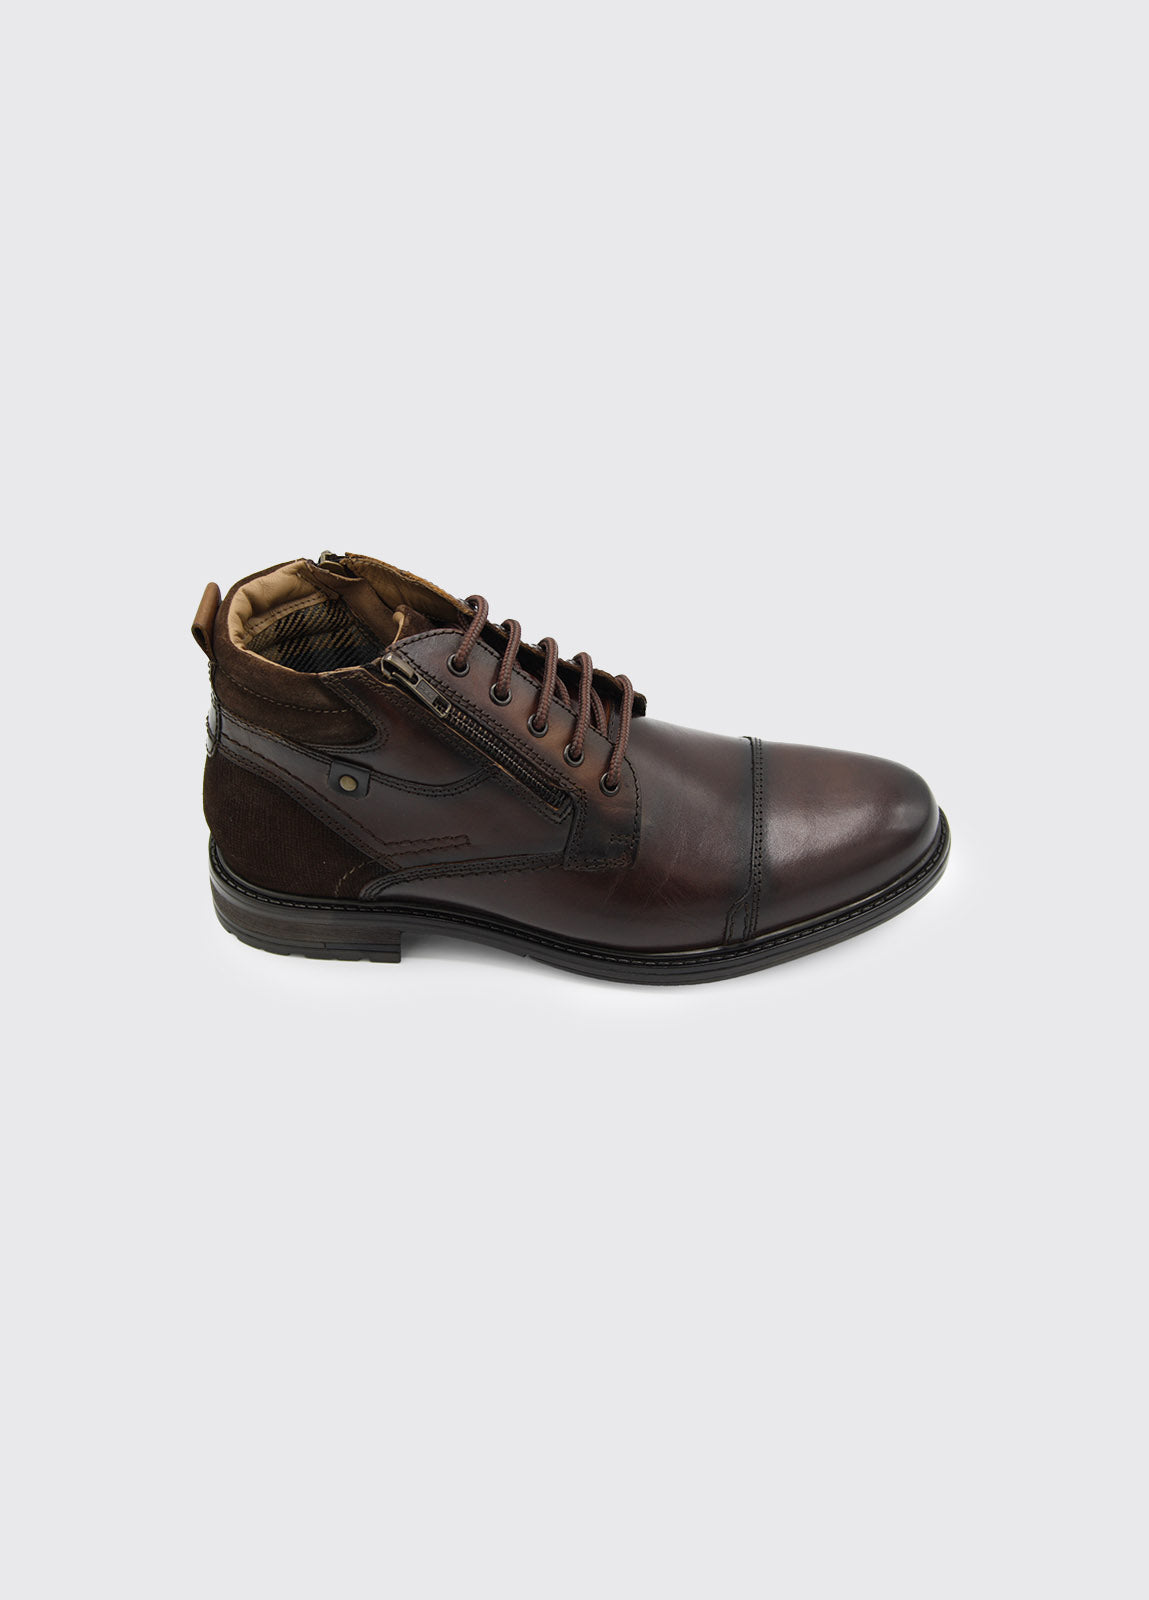 Men's Swatch Brown Boot-Side View